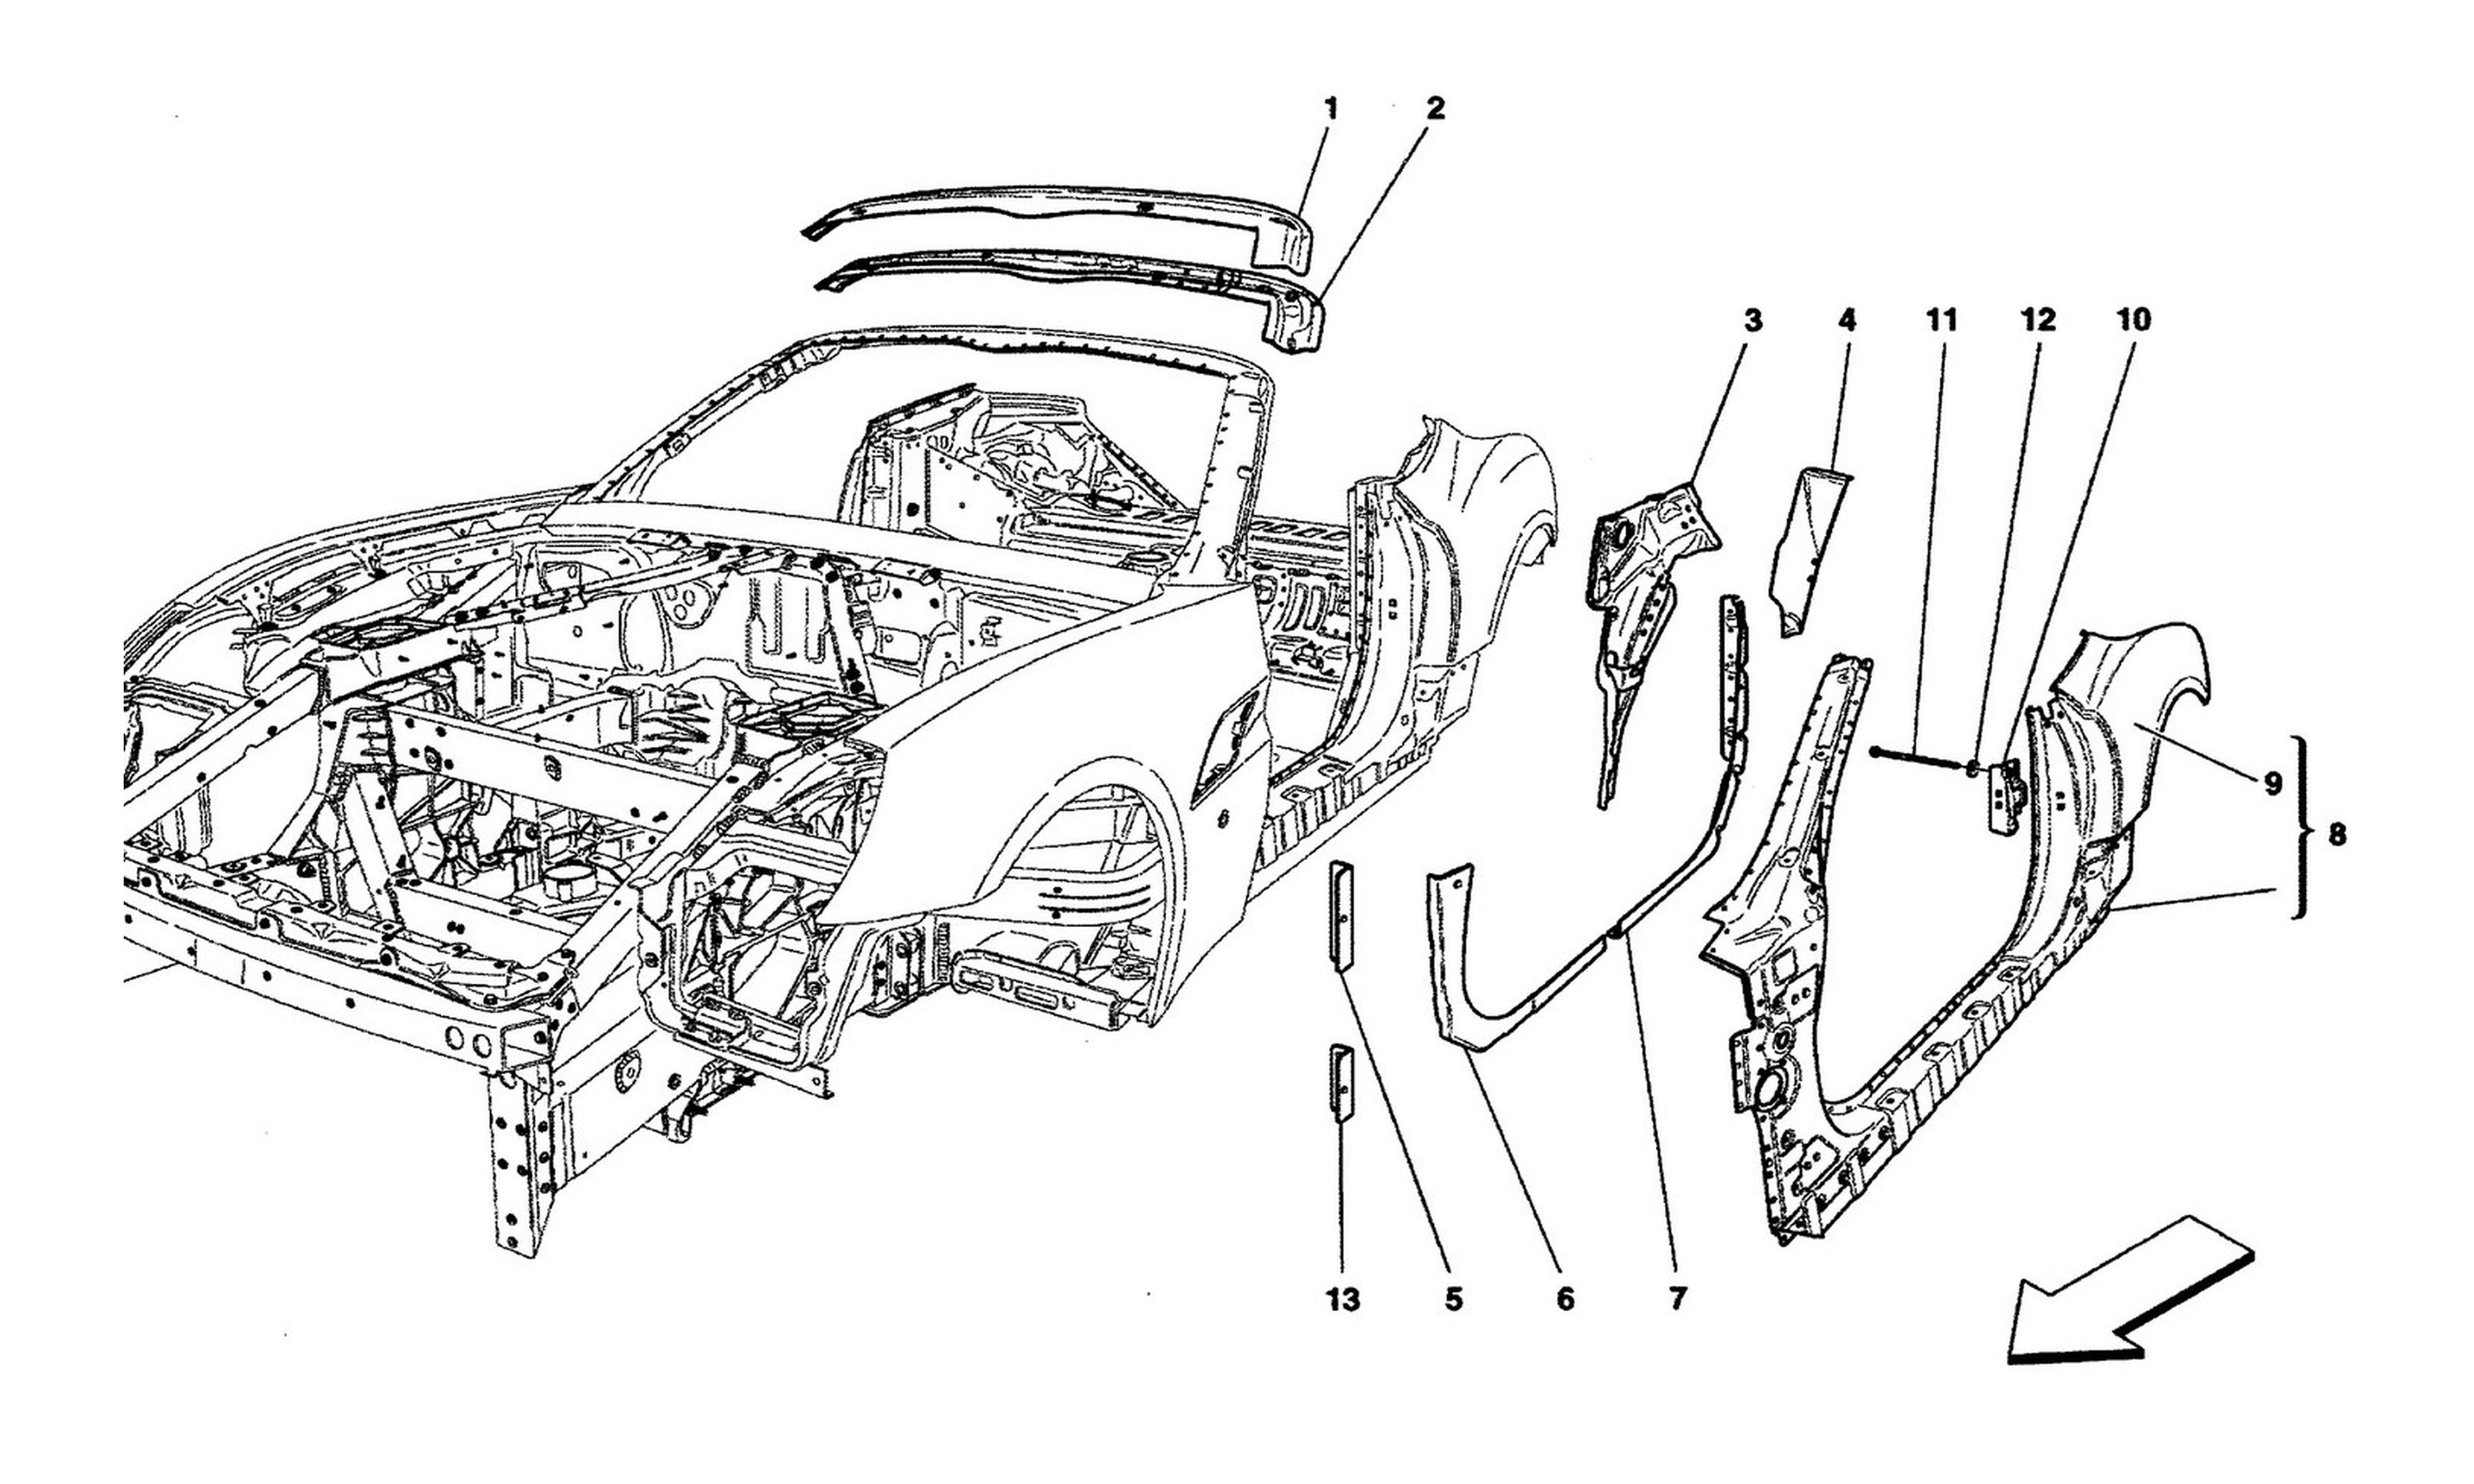 Schematic: Bodywork And Central Outer Trim Panels